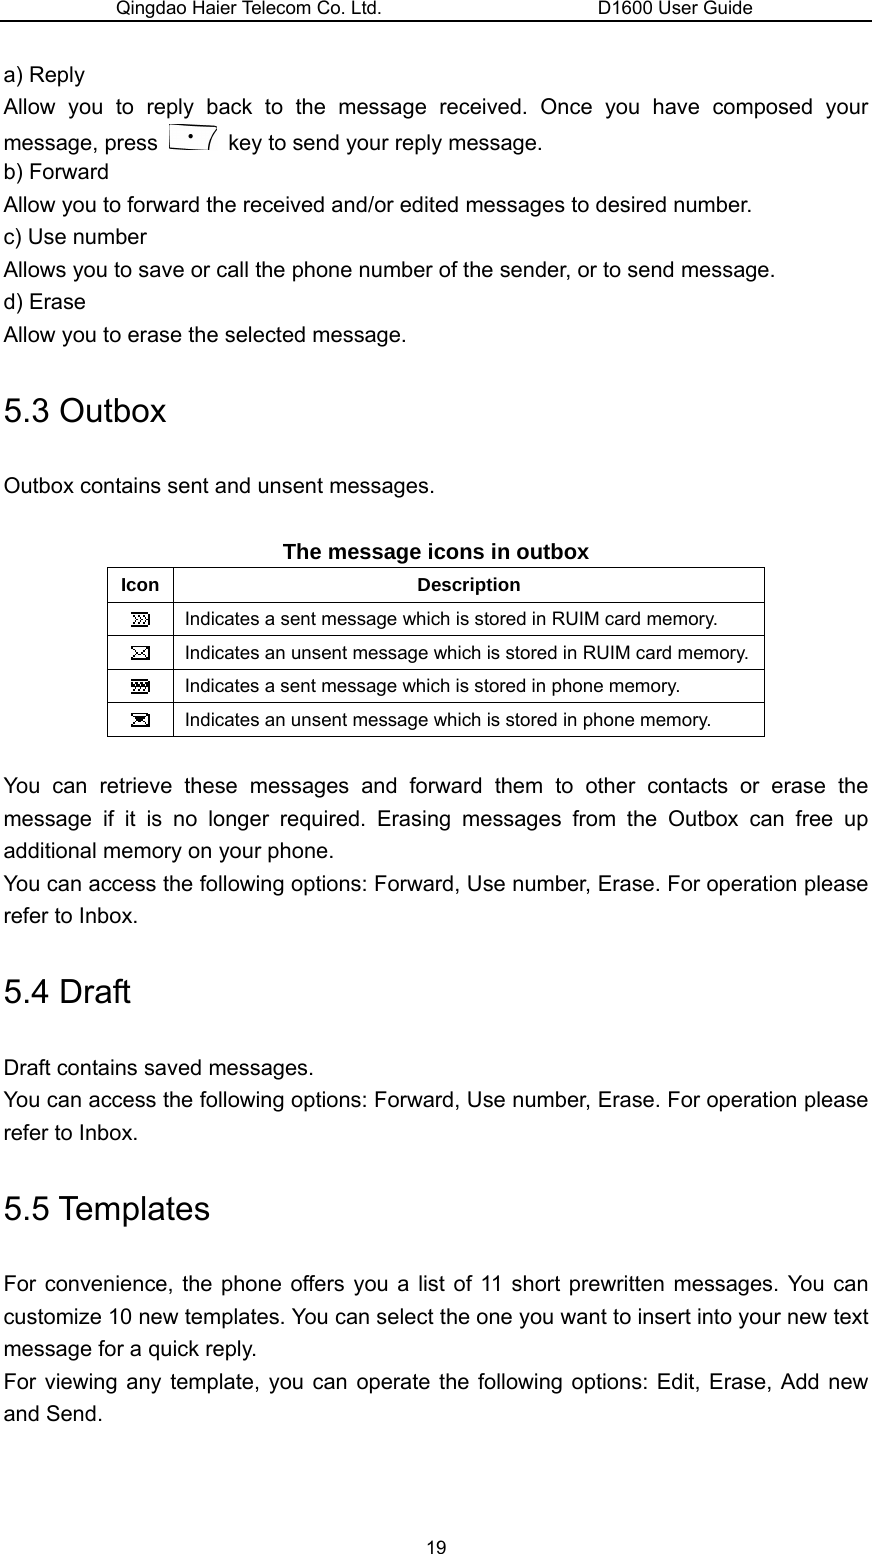 Qingdao Haier Telecom Co. Ltd.                       D1600 User Guide a) Reply Allow you to reply back to the message received. Once you have composed your message, press    key to send your reply message. b) Forward Allow you to forward the received and/or edited messages to desired number. c) Use number Allows you to save or call the phone number of the sender, or to send message. d) Erase Allow you to erase the selected message. 5.3 Outbox Outbox contains sent and unsent messages.  The message icons in outbox Icon Description  Indicates a sent message which is stored in RUIM card memory.  Indicates an unsent message which is stored in RUIM card memory.  Indicates a sent message which is stored in phone memory.  Indicates an unsent message which is stored in phone memory.  You can retrieve these messages and forward them to other contacts or erase the message if it is no longer required. Erasing messages from the Outbox can free up additional memory on your phone. You can access the following options: Forward, Use number, Erase. For operation please refer to Inbox. 5.4 Draft Draft contains saved messages. You can access the following options: Forward, Use number, Erase. For operation please refer to Inbox. 5.5 Templates For convenience, the phone offers you a list of 11 short prewritten messages. You can customize 10 new templates. You can select the one you want to insert into your new text message for a quick reply. For viewing any template, you can operate the following options: Edit, Erase, Add new and Send. 19 